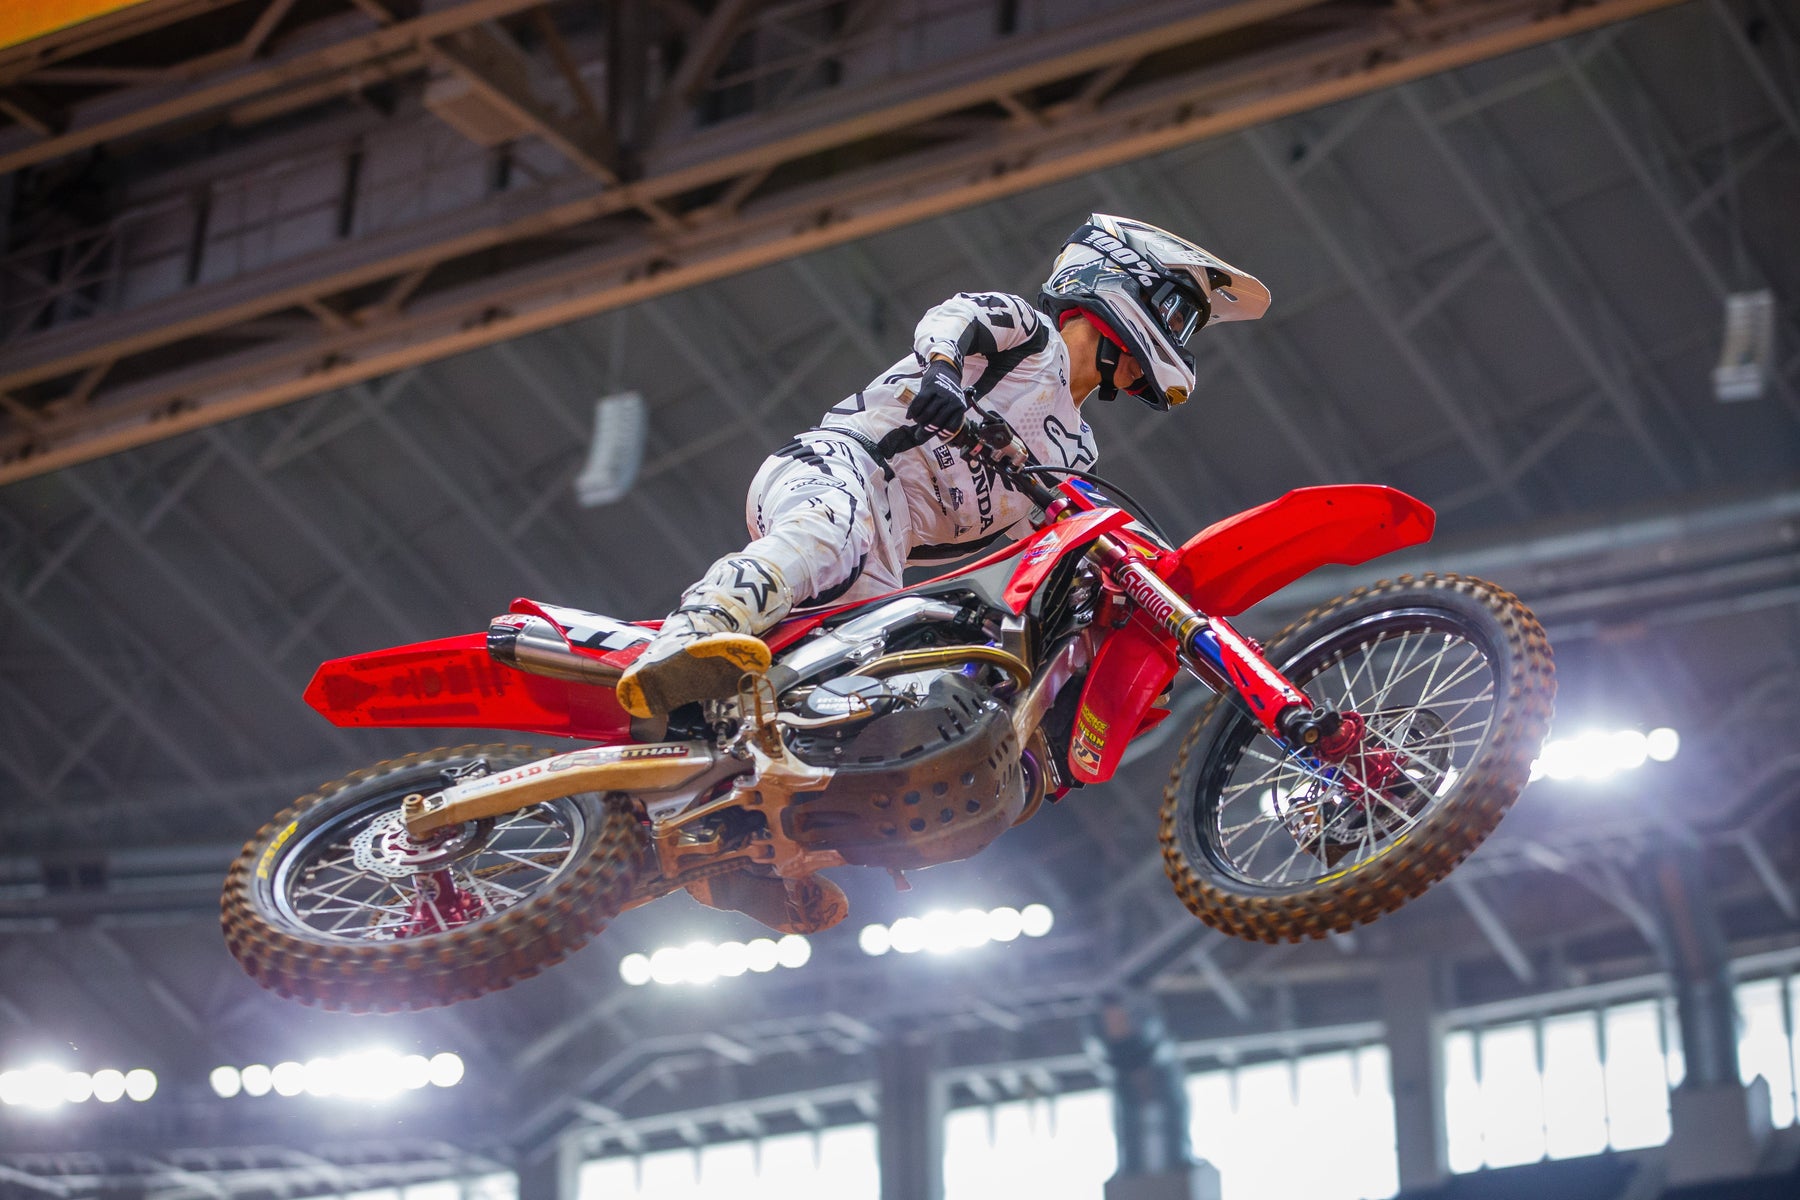 AGGRESSIVE PERFORMANCE SEES HUNTER LAWRENCE POWER TO 250SX (WEST) GLORY AT ARLINGTON 2